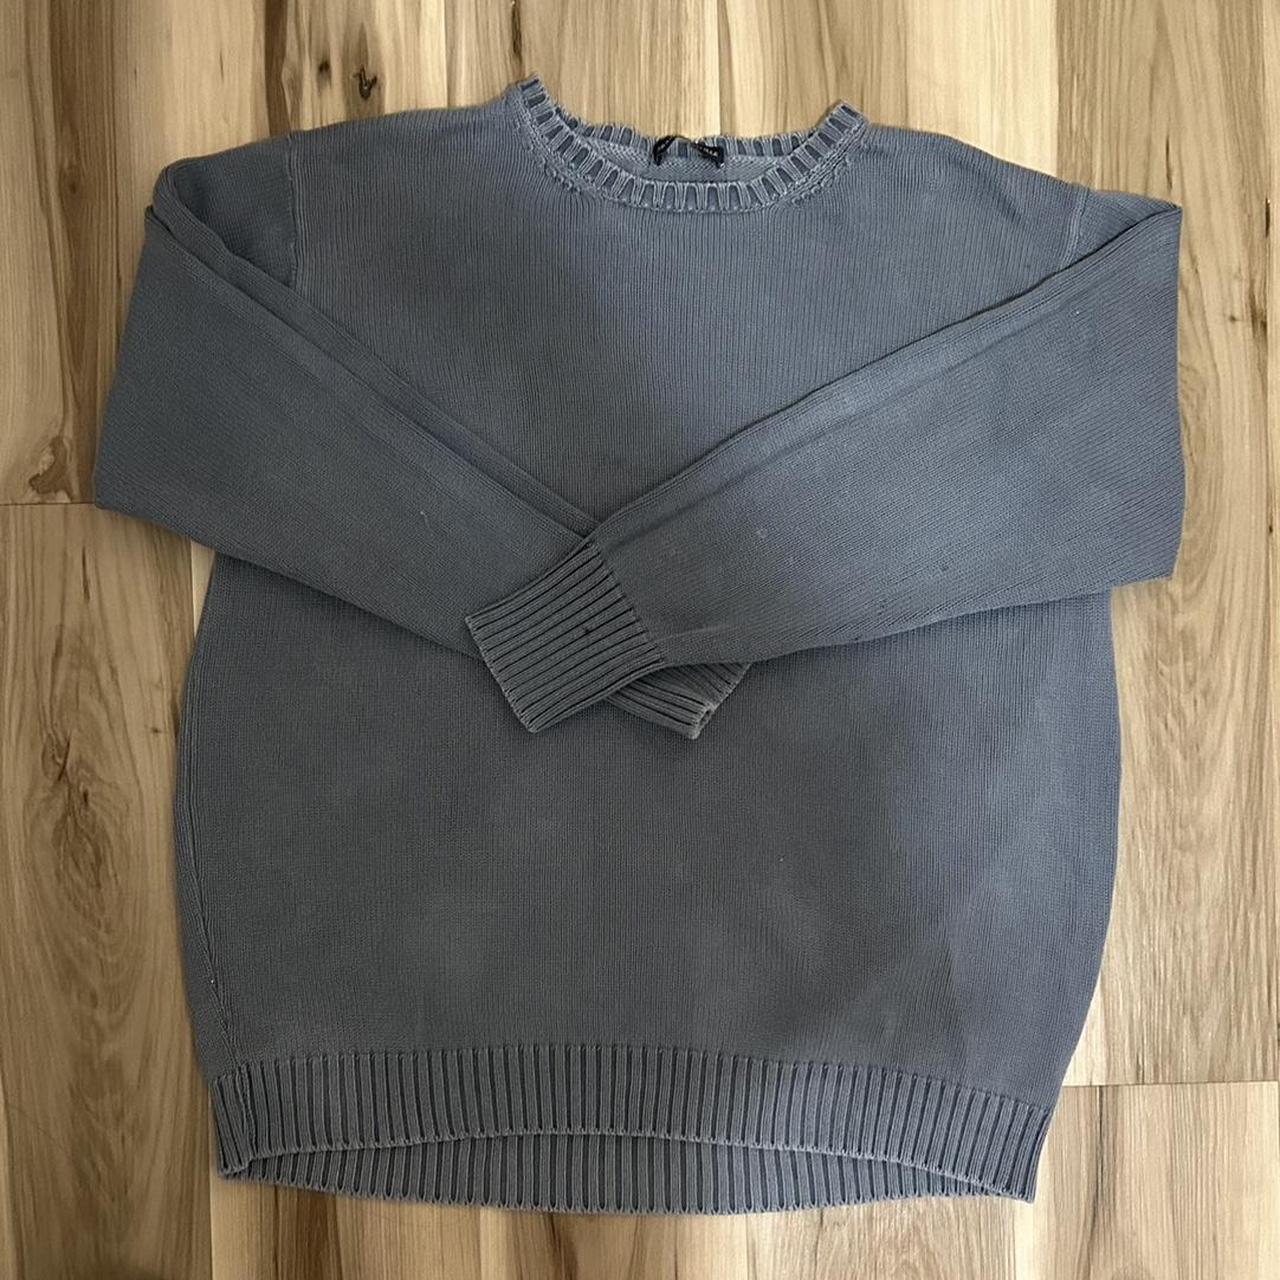 Brandy Melville ‘Brianna’ Cotton Sweater There’s... - Depop